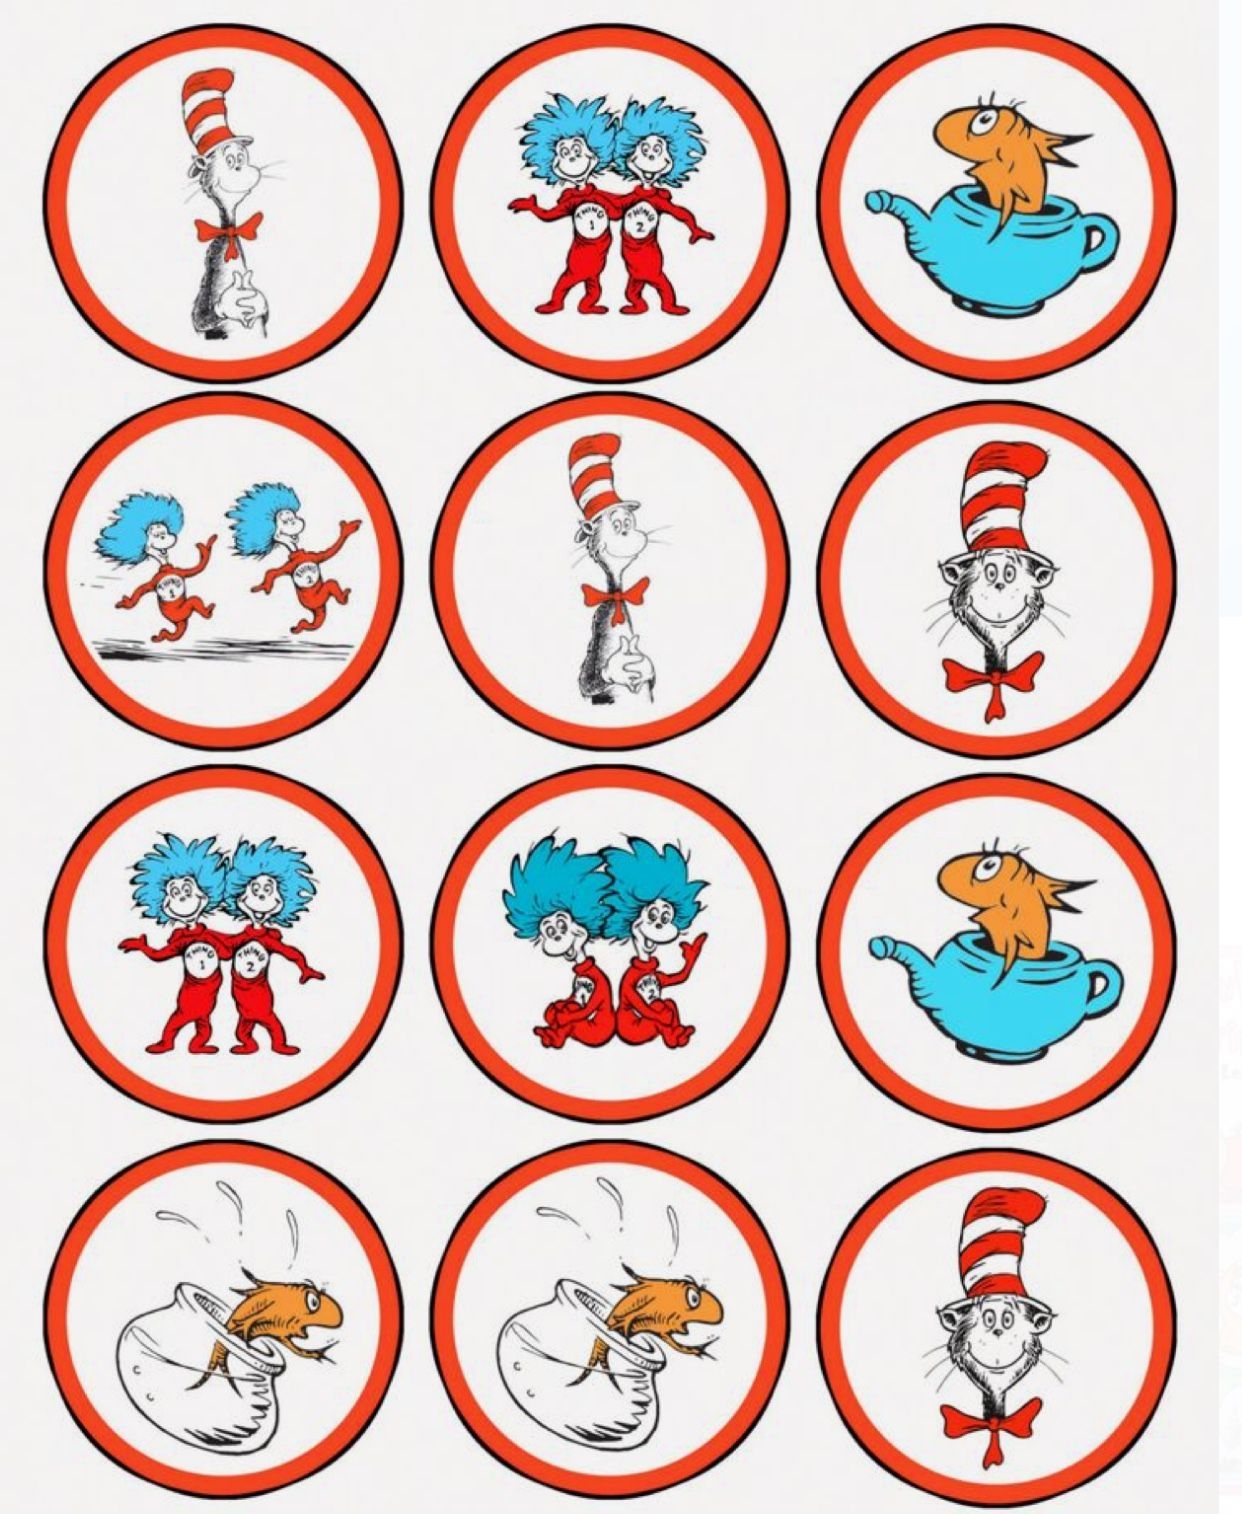 Pin By Yvonne Ginoulis On Dr Seuss Dr Seuss Cupcake Toppers Dr Seuss Birthday Party Dr Seuss Cupcakes